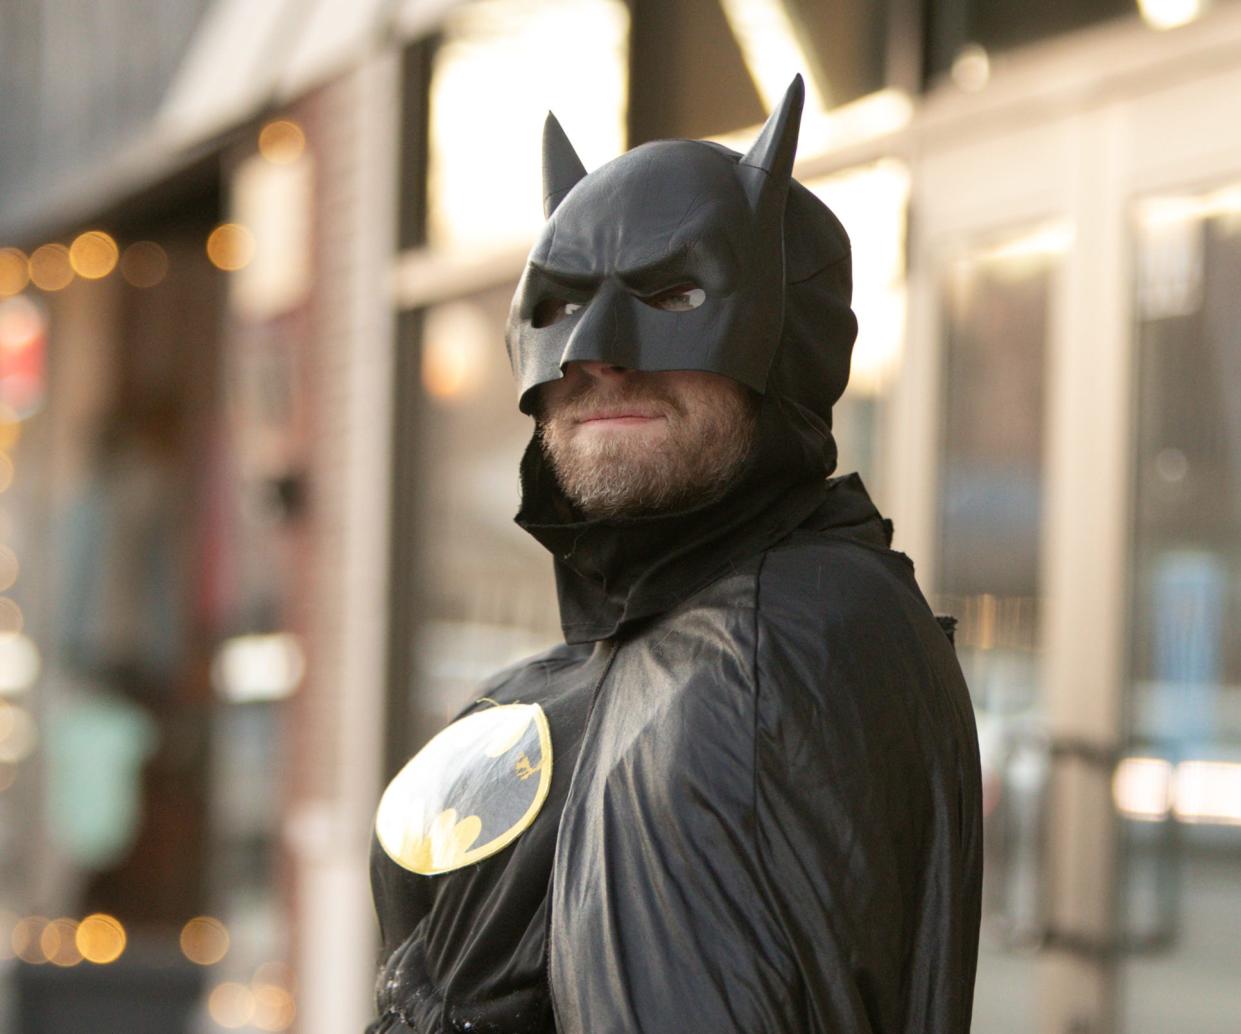 Batman looks to passing traffic on downtown Brighton's Main Street Friday, Jan. 21, 2022. He strolls up and down the business district greeting customers and passers-by.